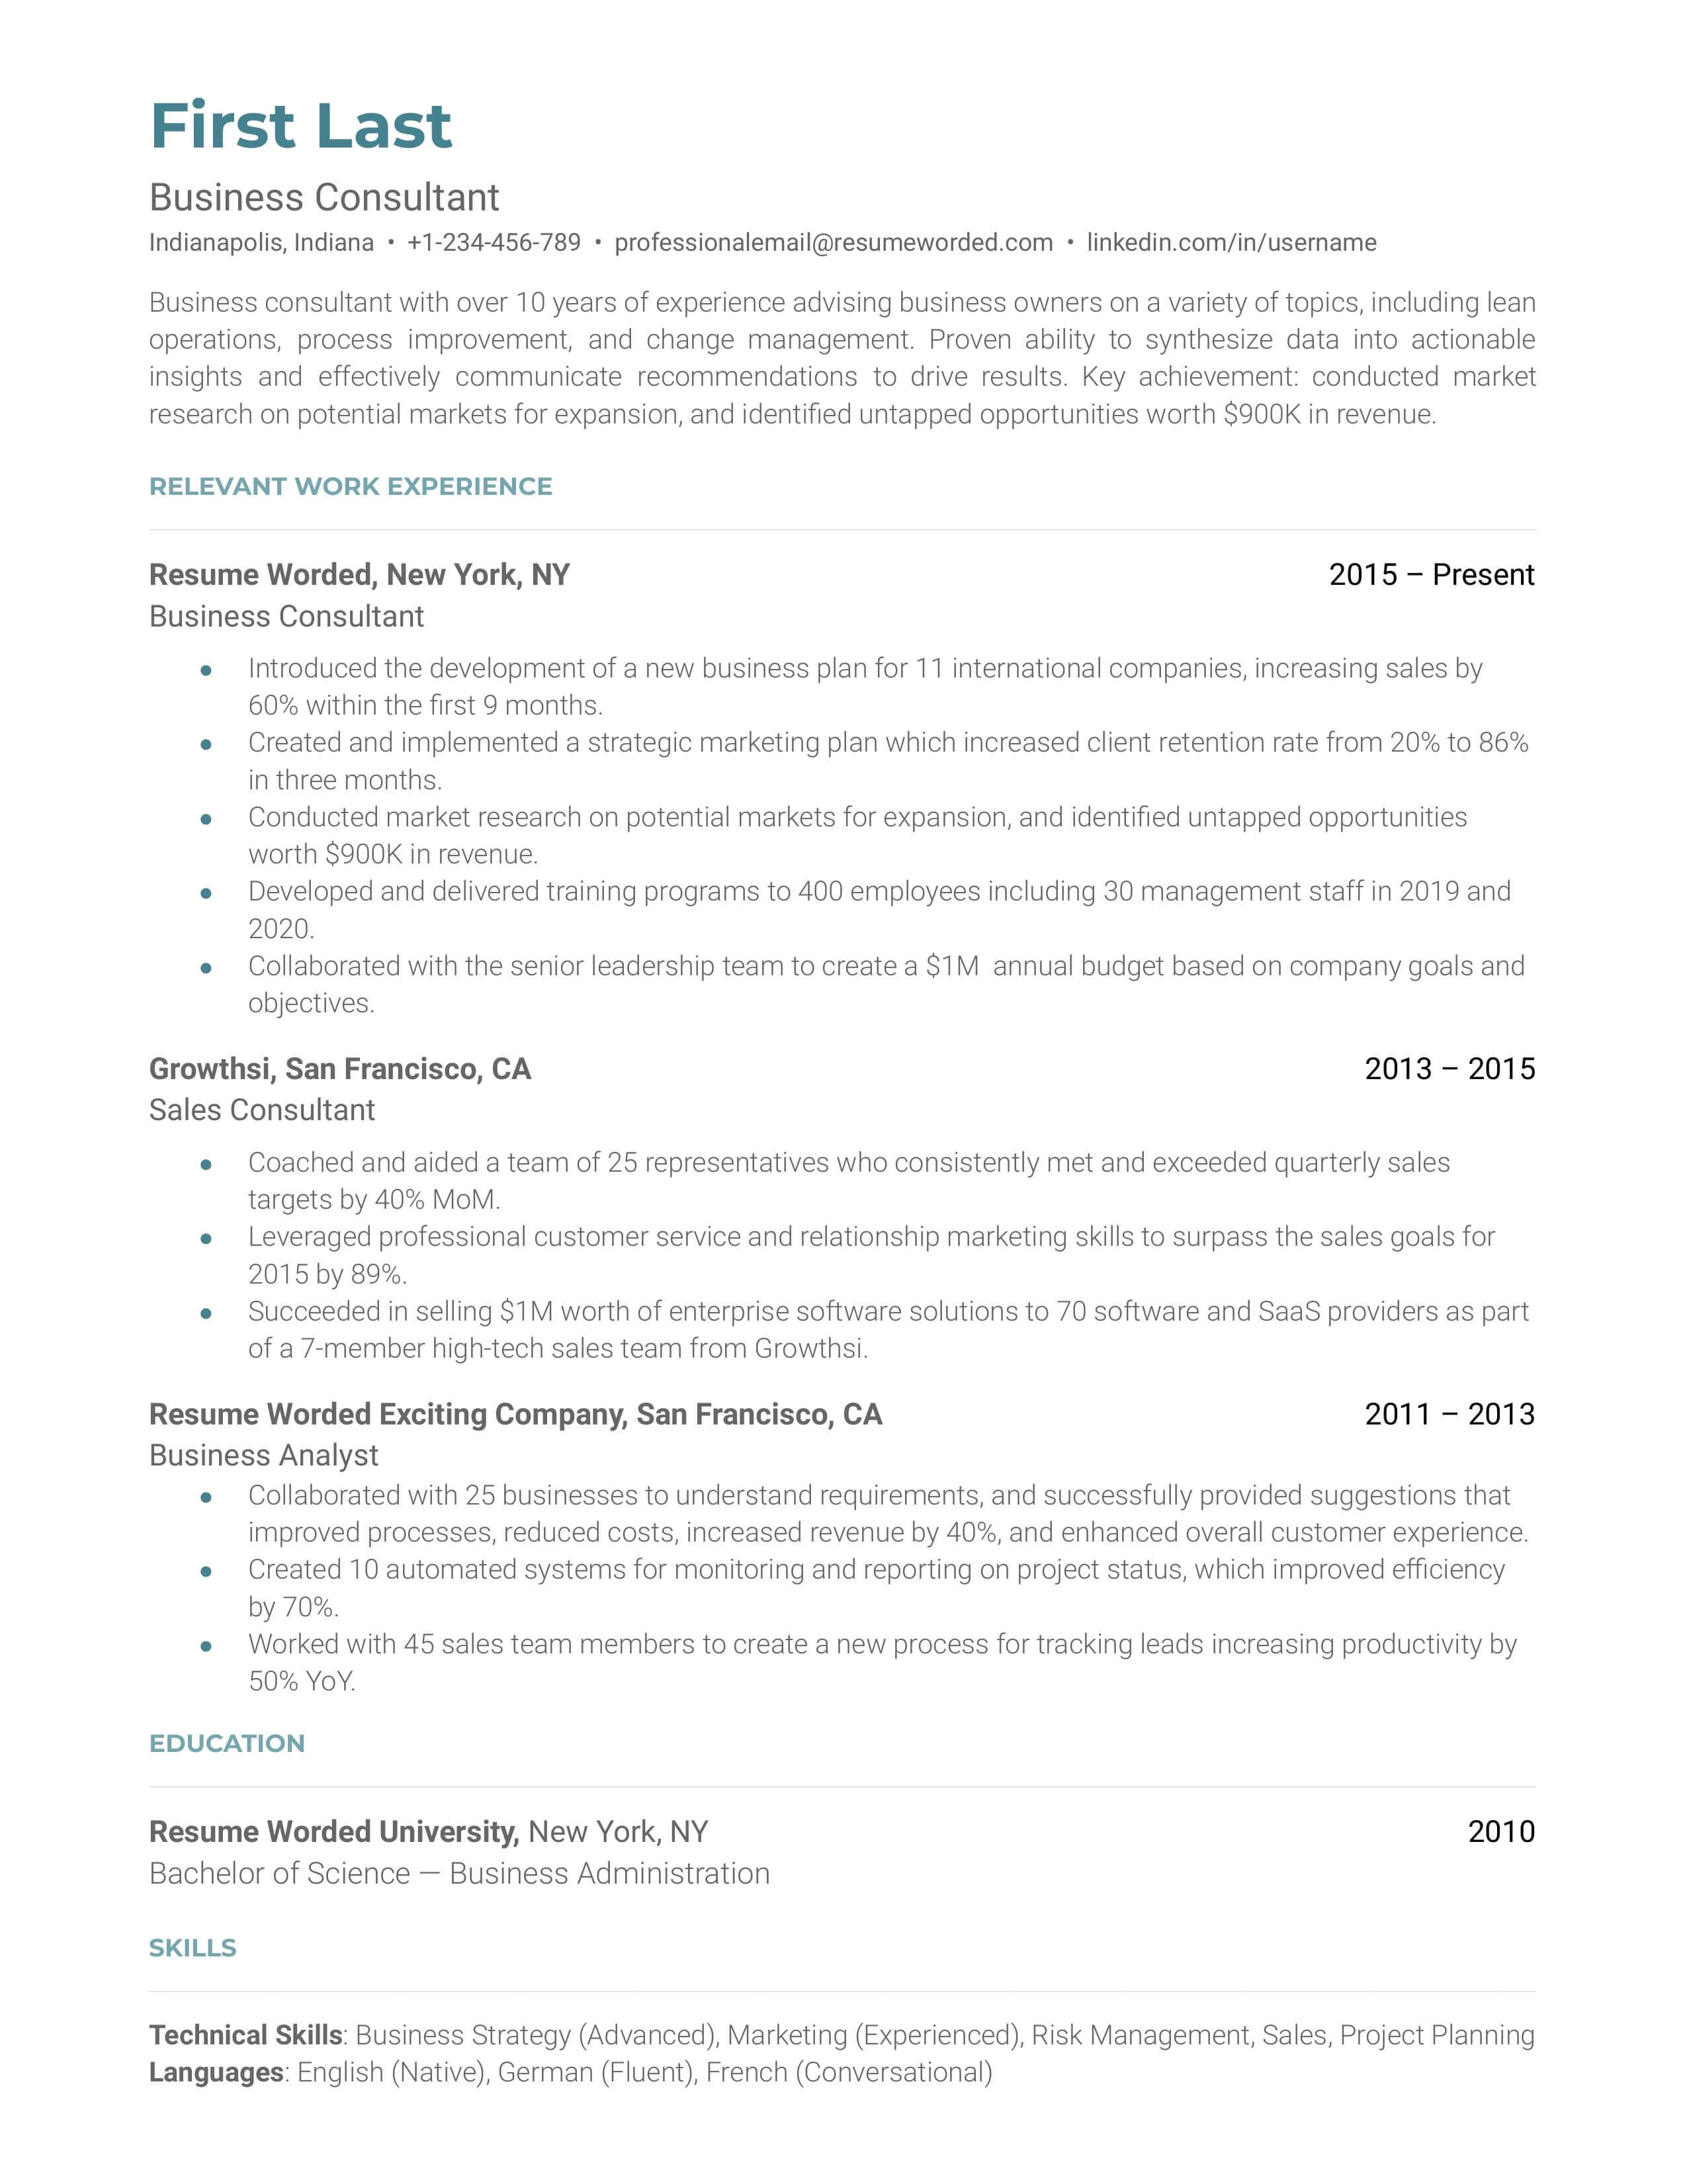 Professional CV of a Business Consultant showcasing their expertise and accomplishments.